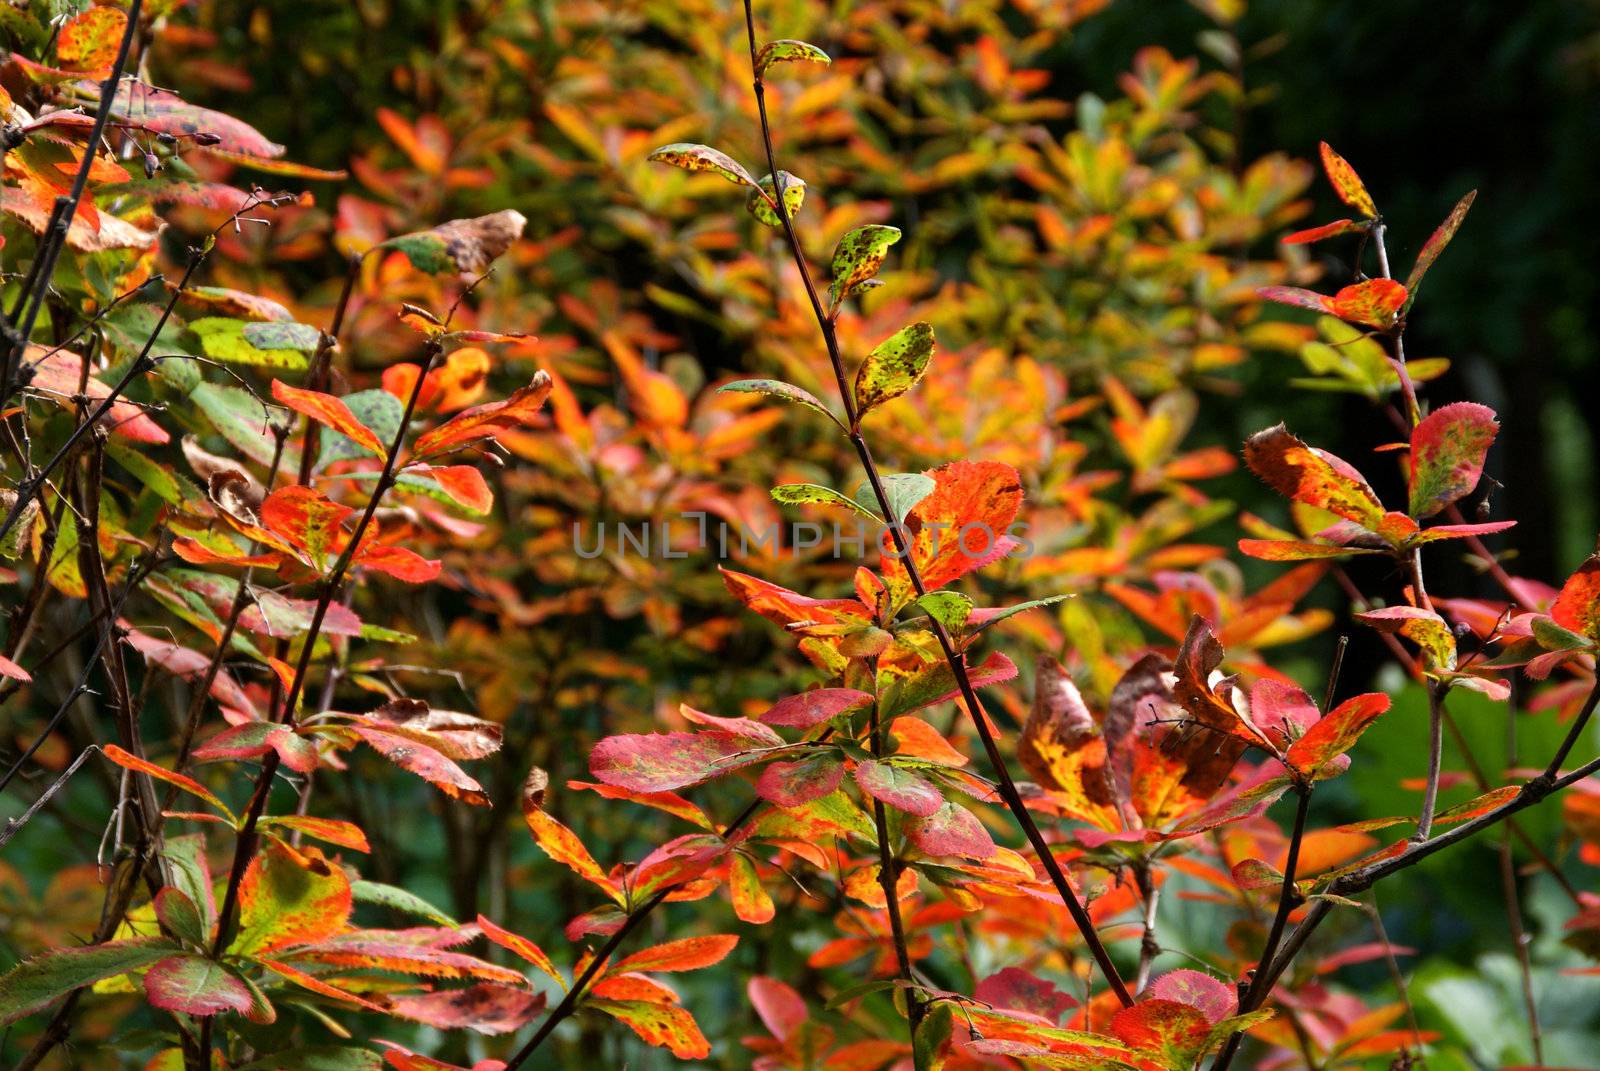 The leaves of Barberry (Berberis amurensis) changing colors in the fall.